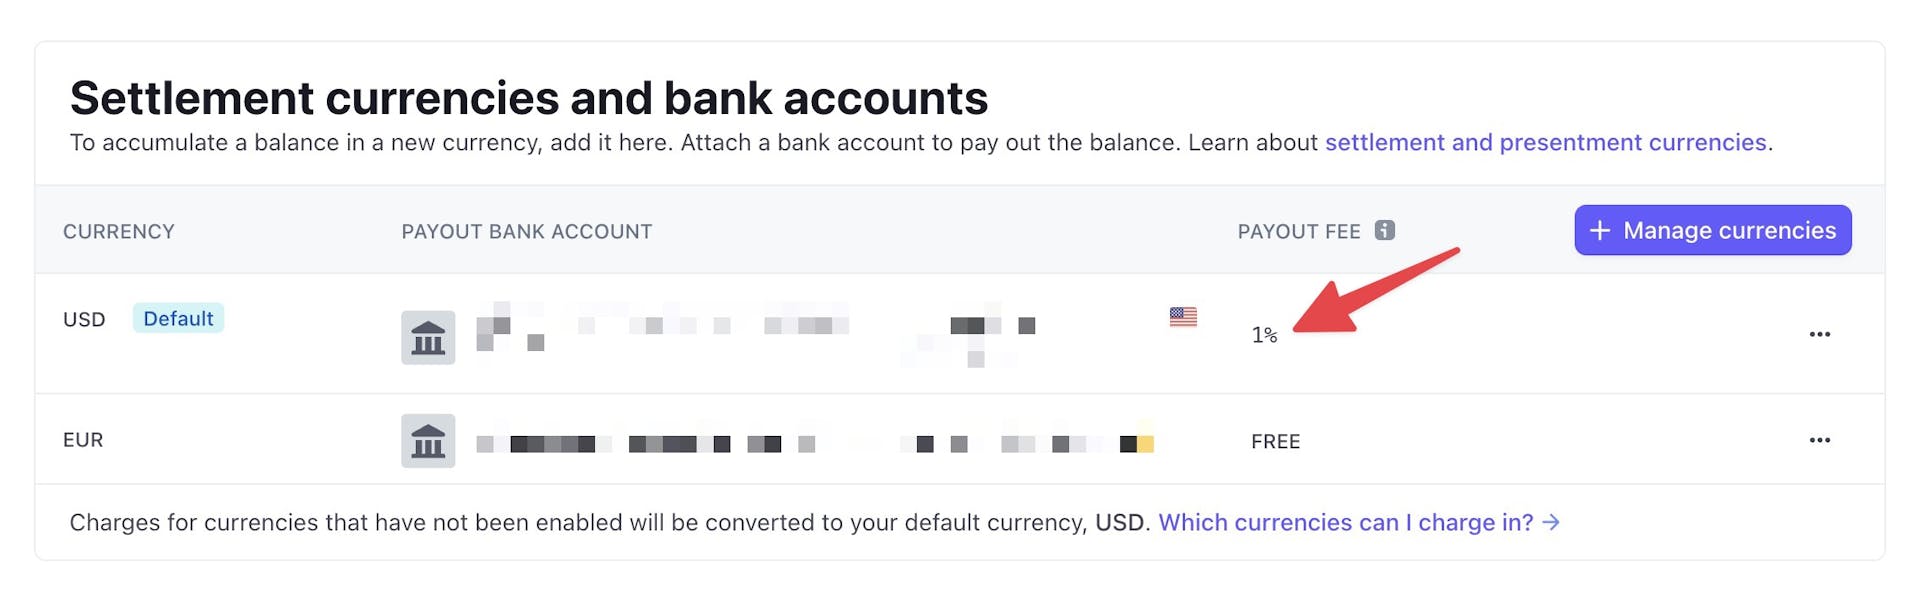 A Stripe bank accounts setup showing the payout fees for USD and EUR